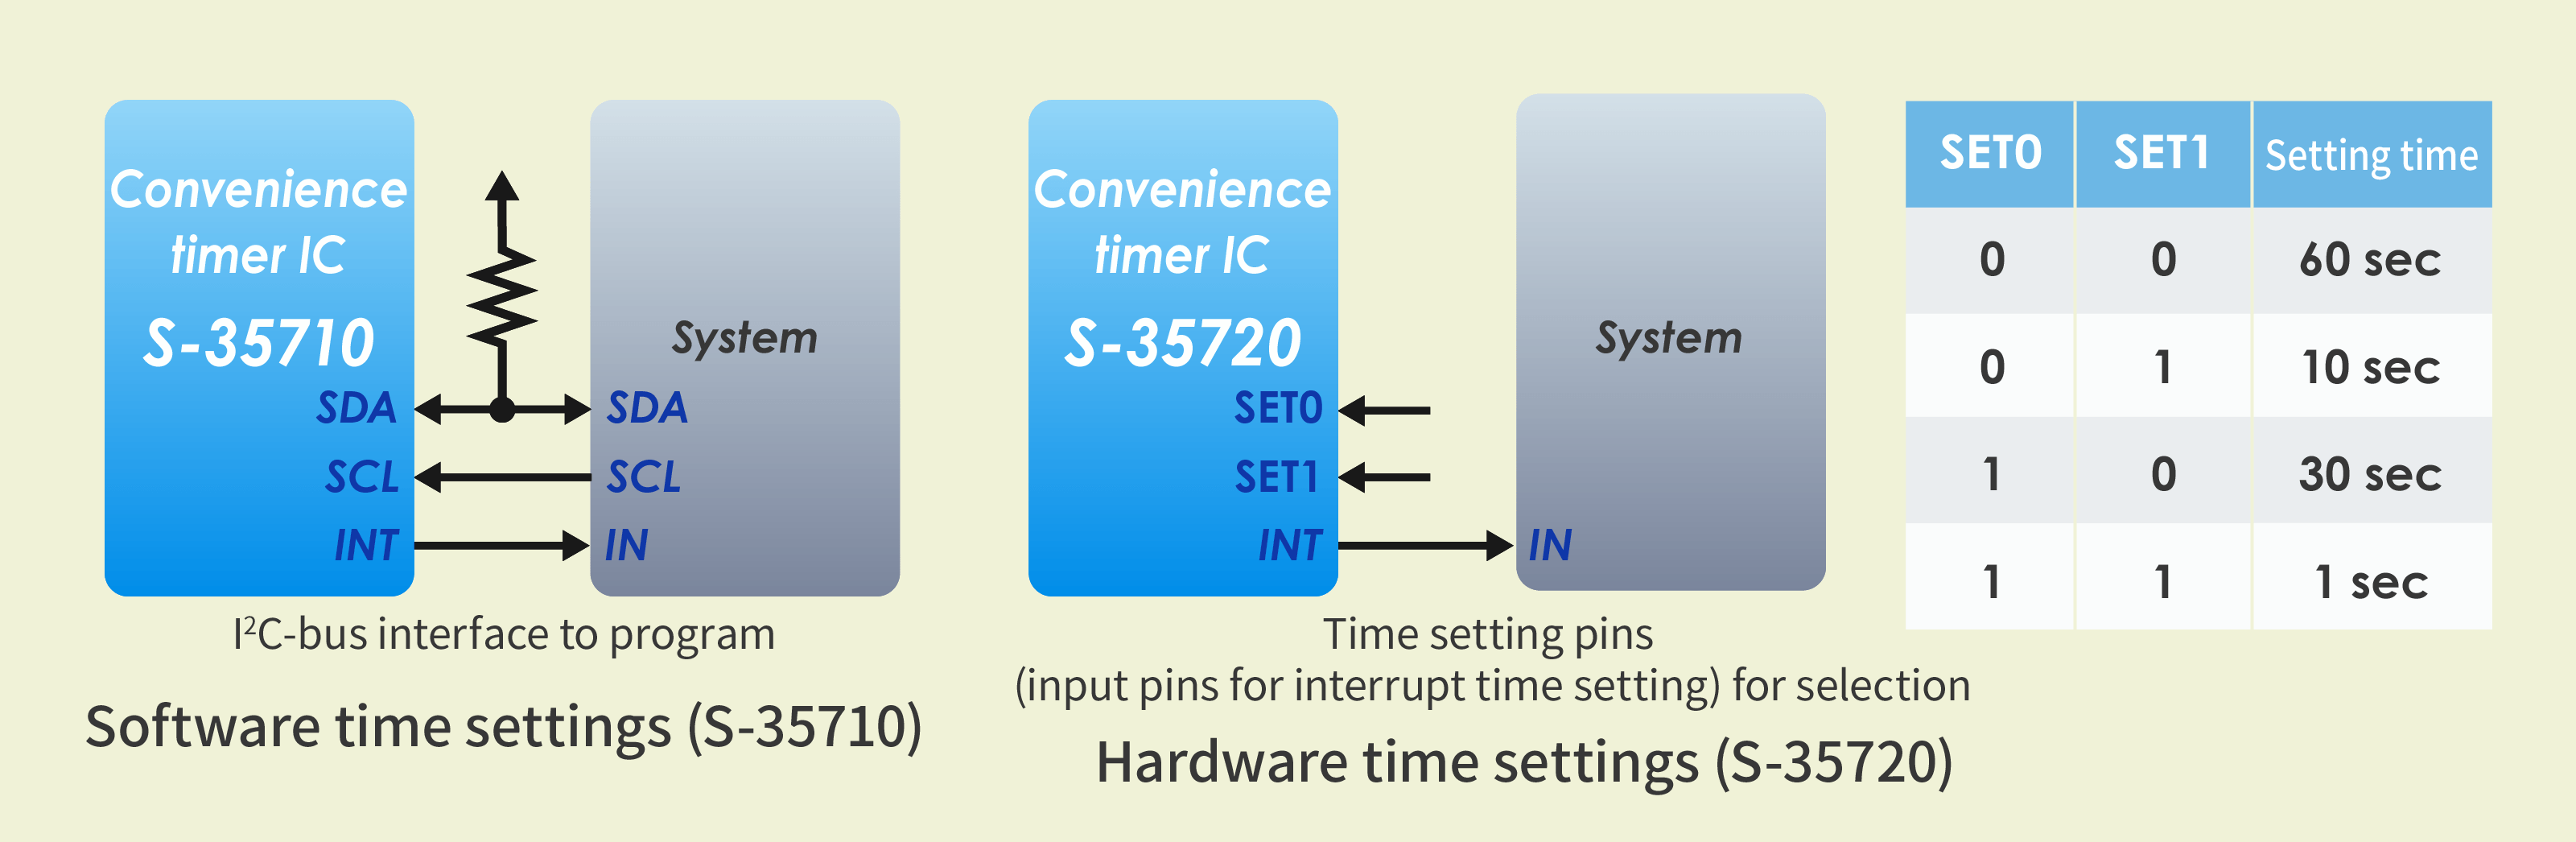 Convenience timer, software time settings (S-35710) and hardware time settings (S-35720)